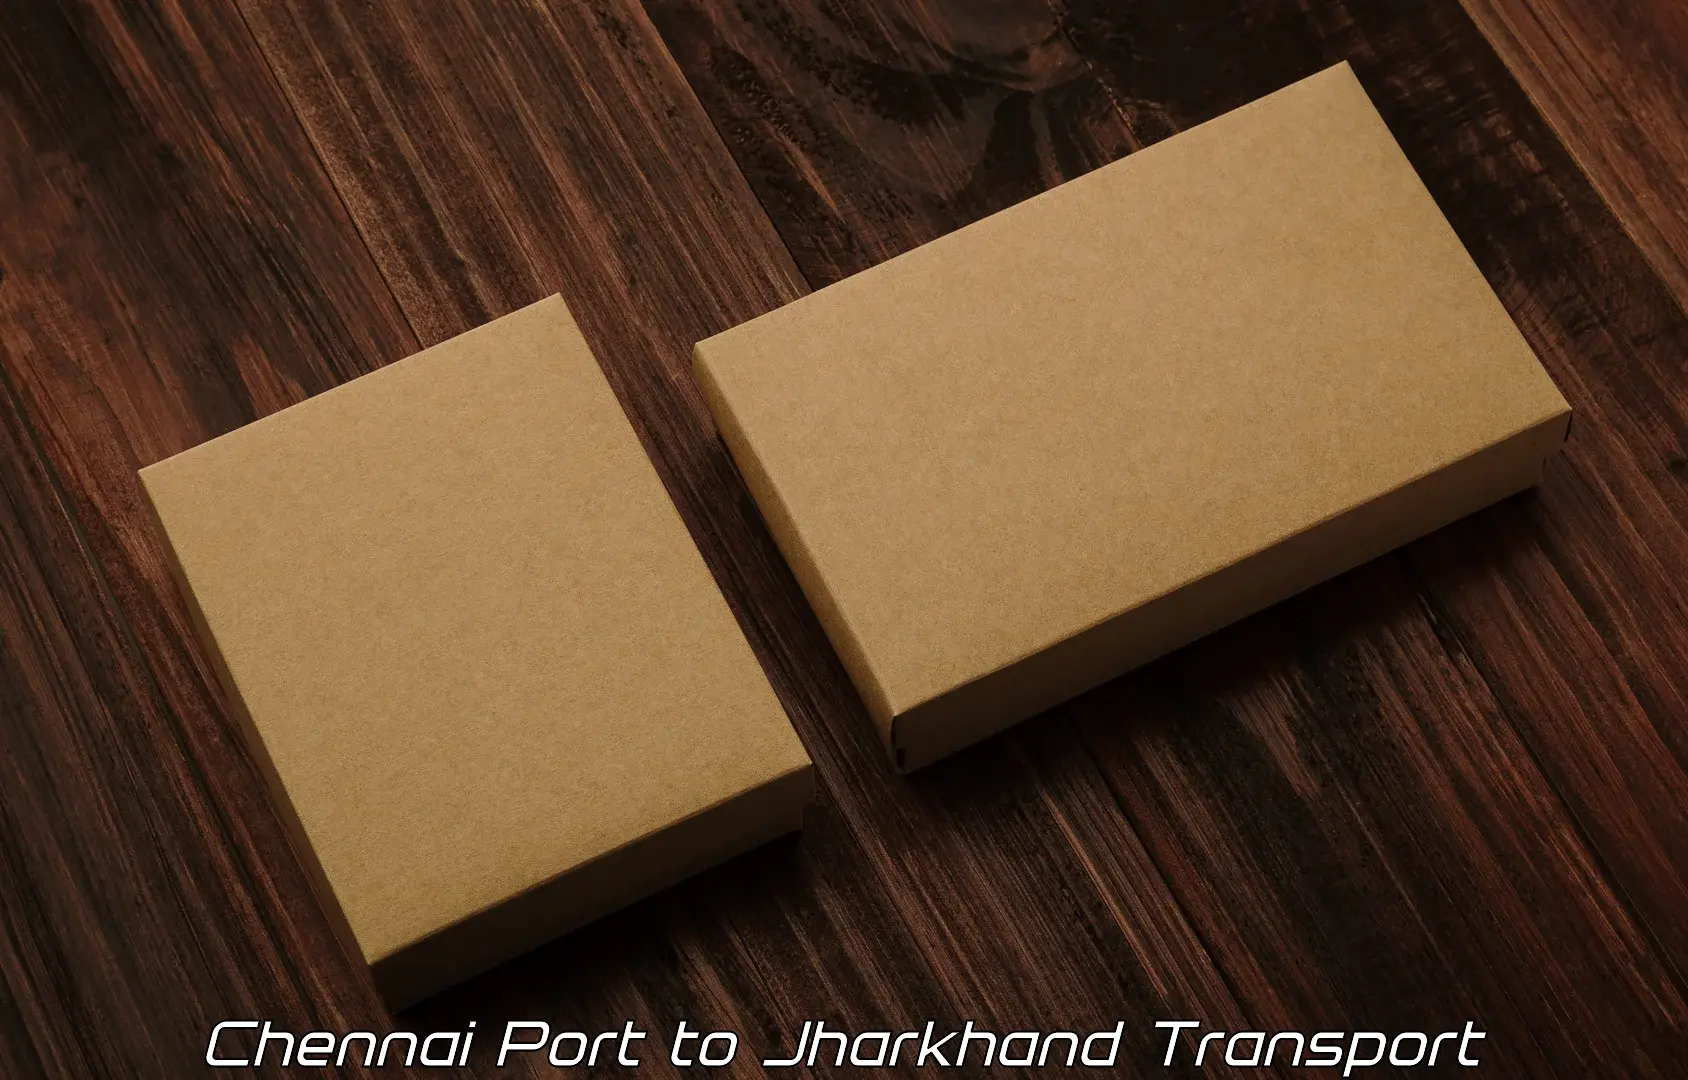 Road transport services in Chennai Port to Jharia